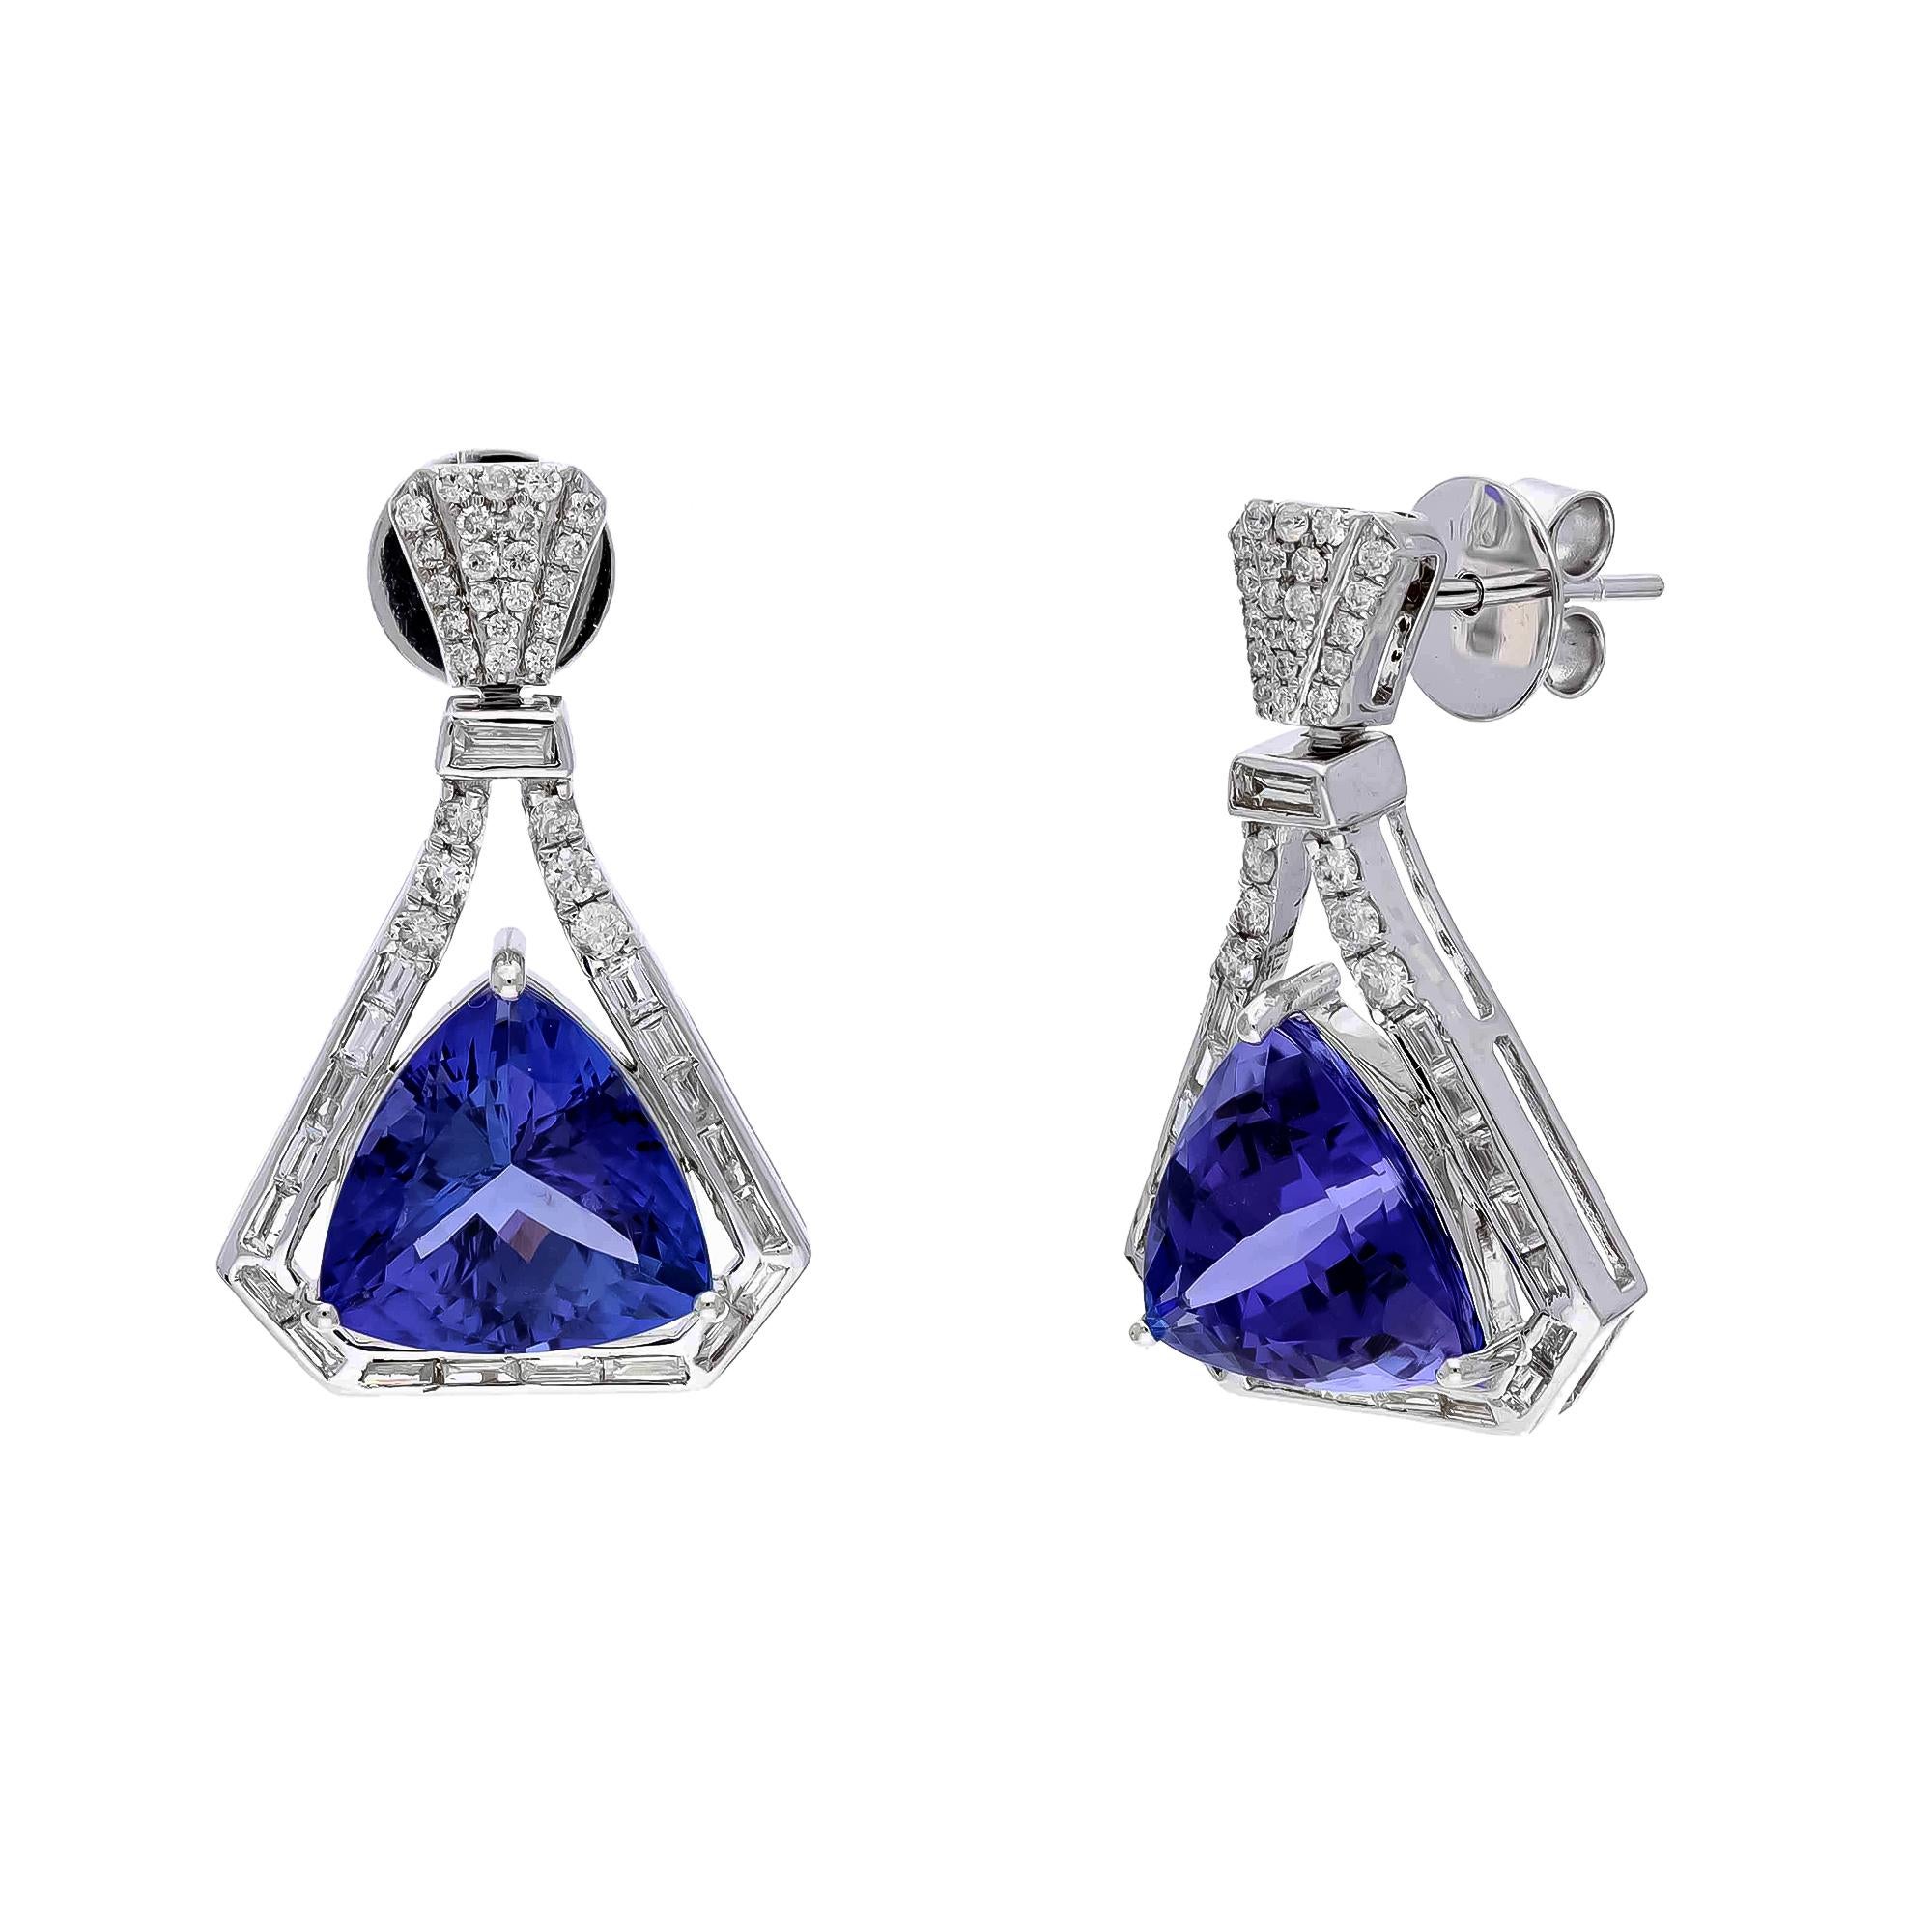 diamonds 1.06cts
tanzanite 10.16cts
gold  7.49 gms



It’s very hard to capture the true color and luster of the stone, I have tried to add pictures which are taken professionally and by me from my I phone to reflect the true image of the item.
Most